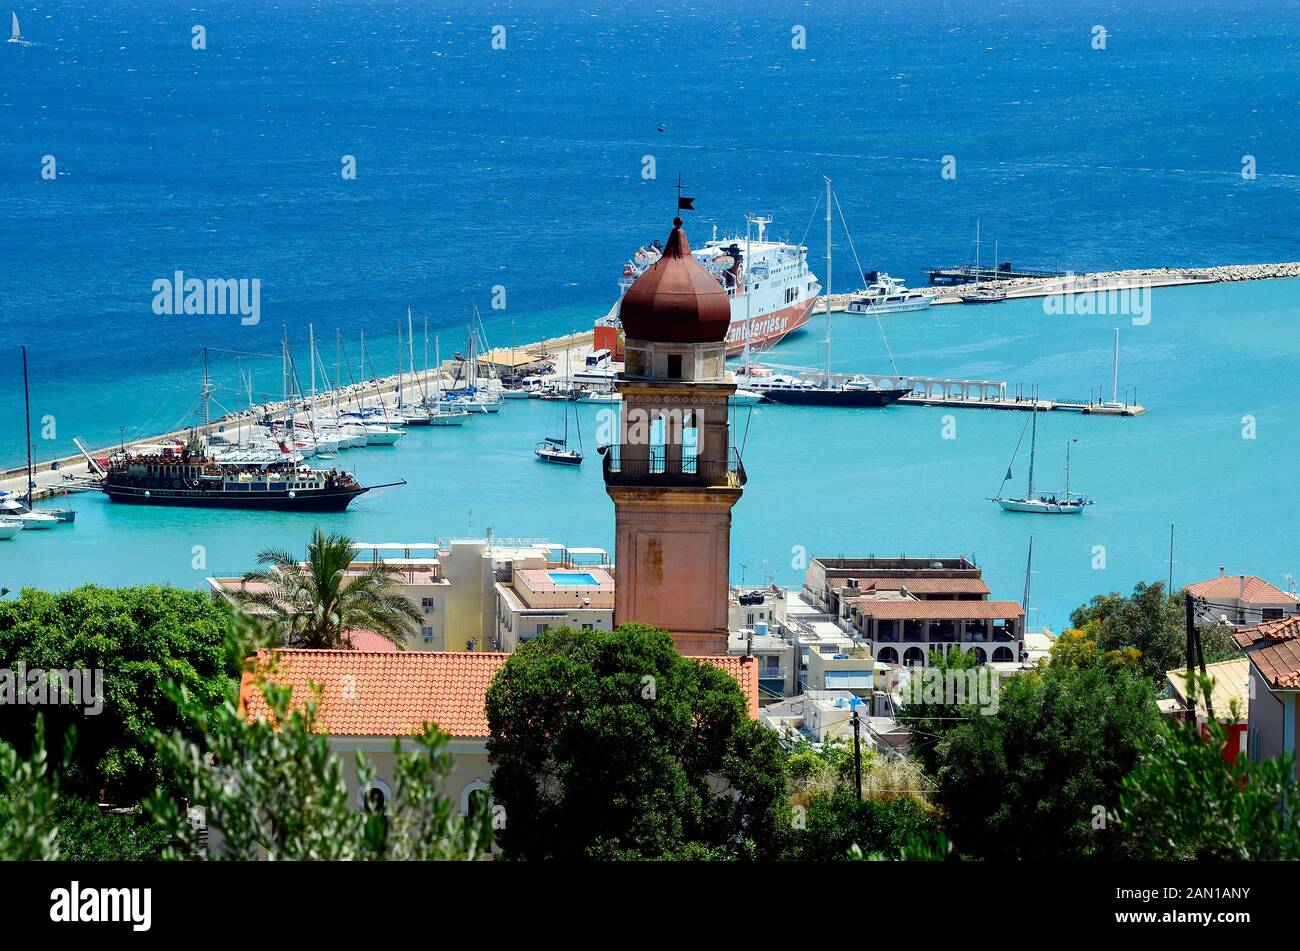 Zakynthos, Greece - May 26, 2016: Ferry ship and boats in the harbor of the capital Stock Photo